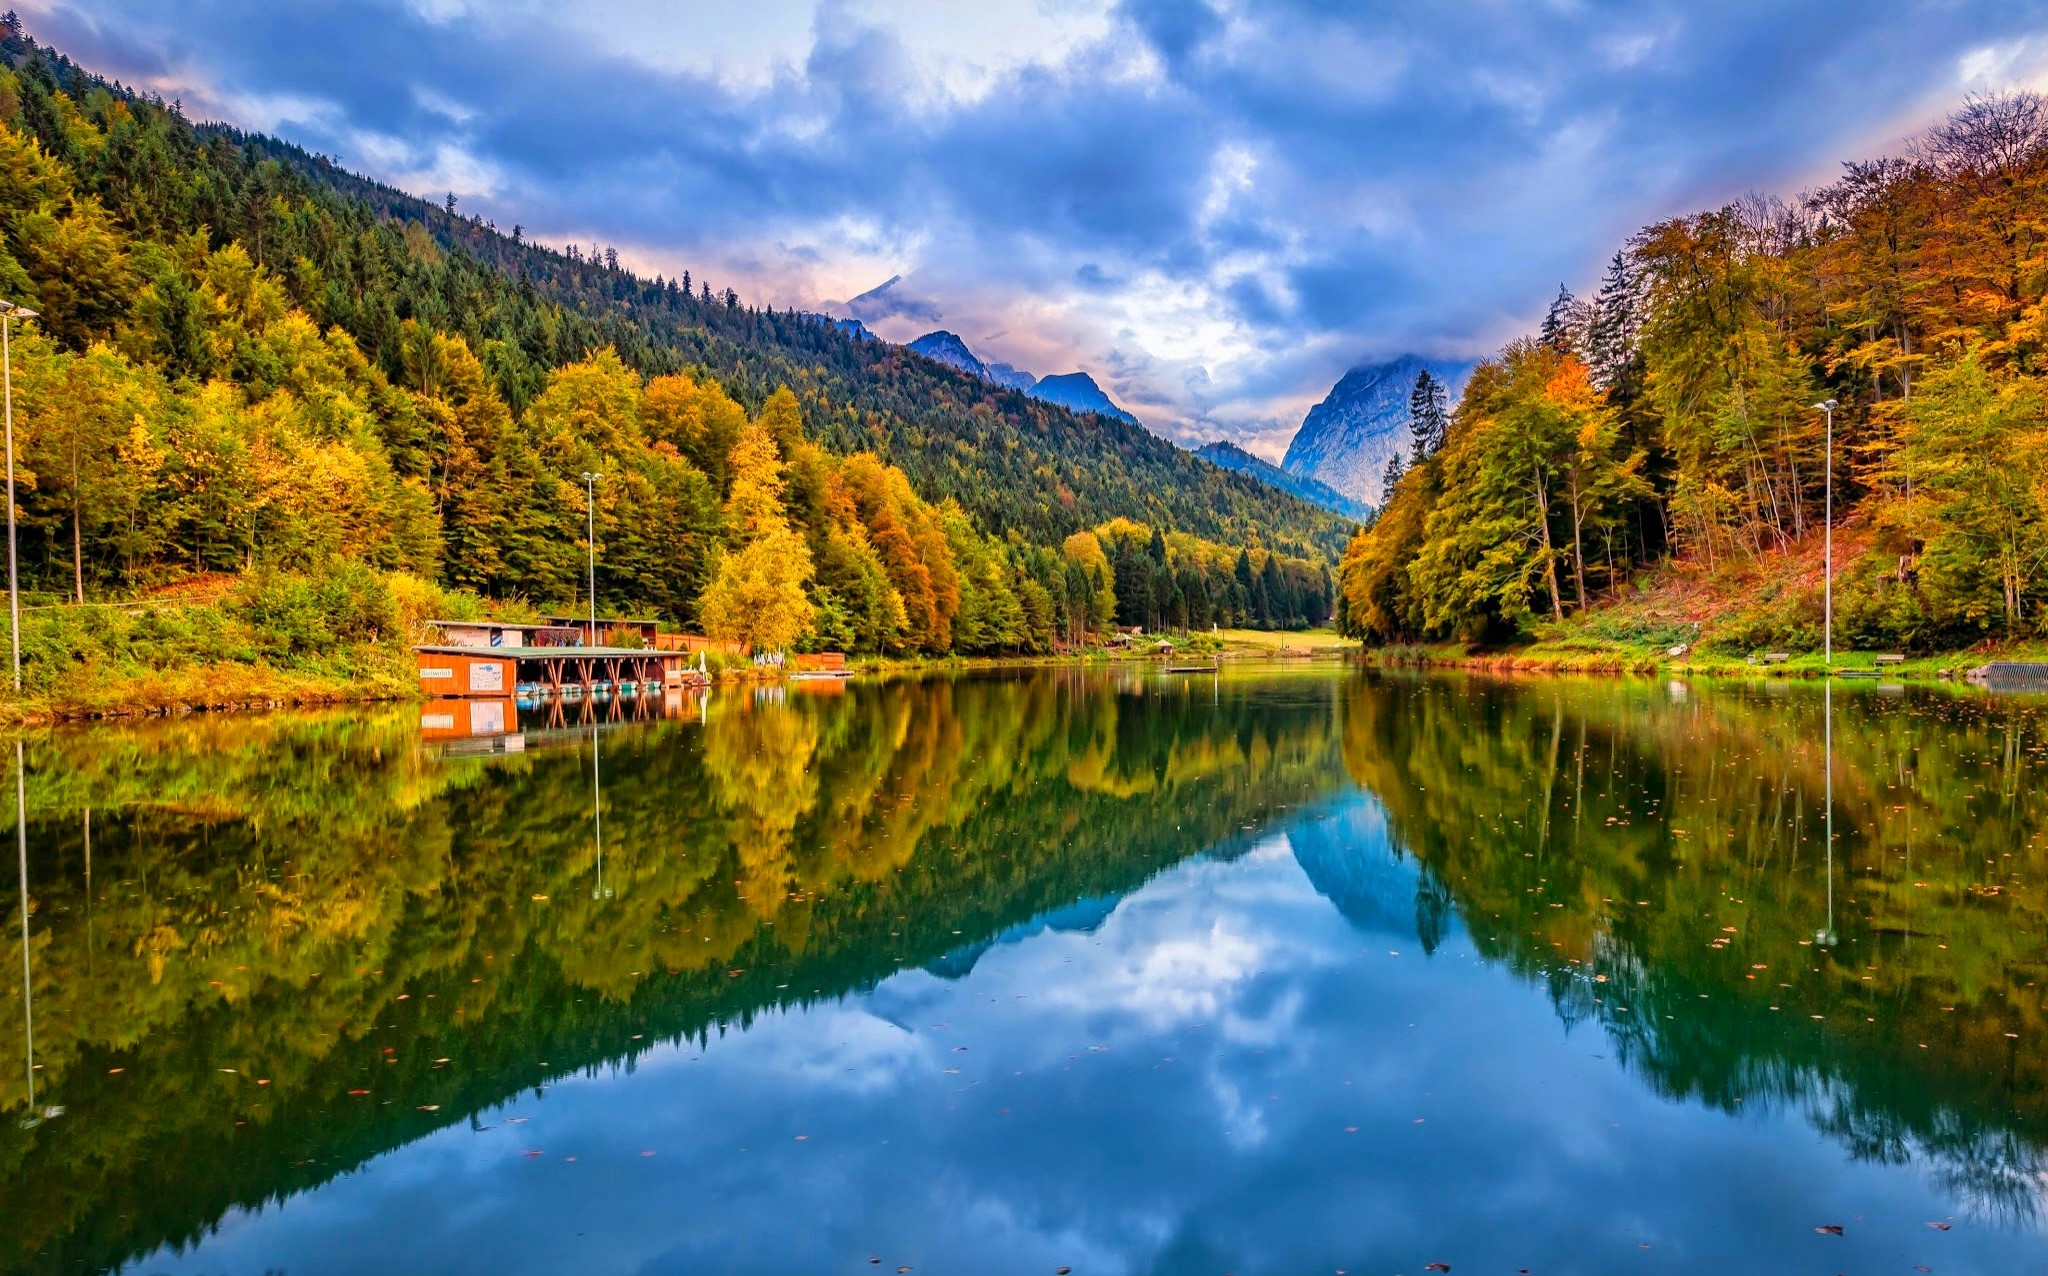 General 2048x1276 lake nature forest landscape mountains fall reflection water clouds Germany trees